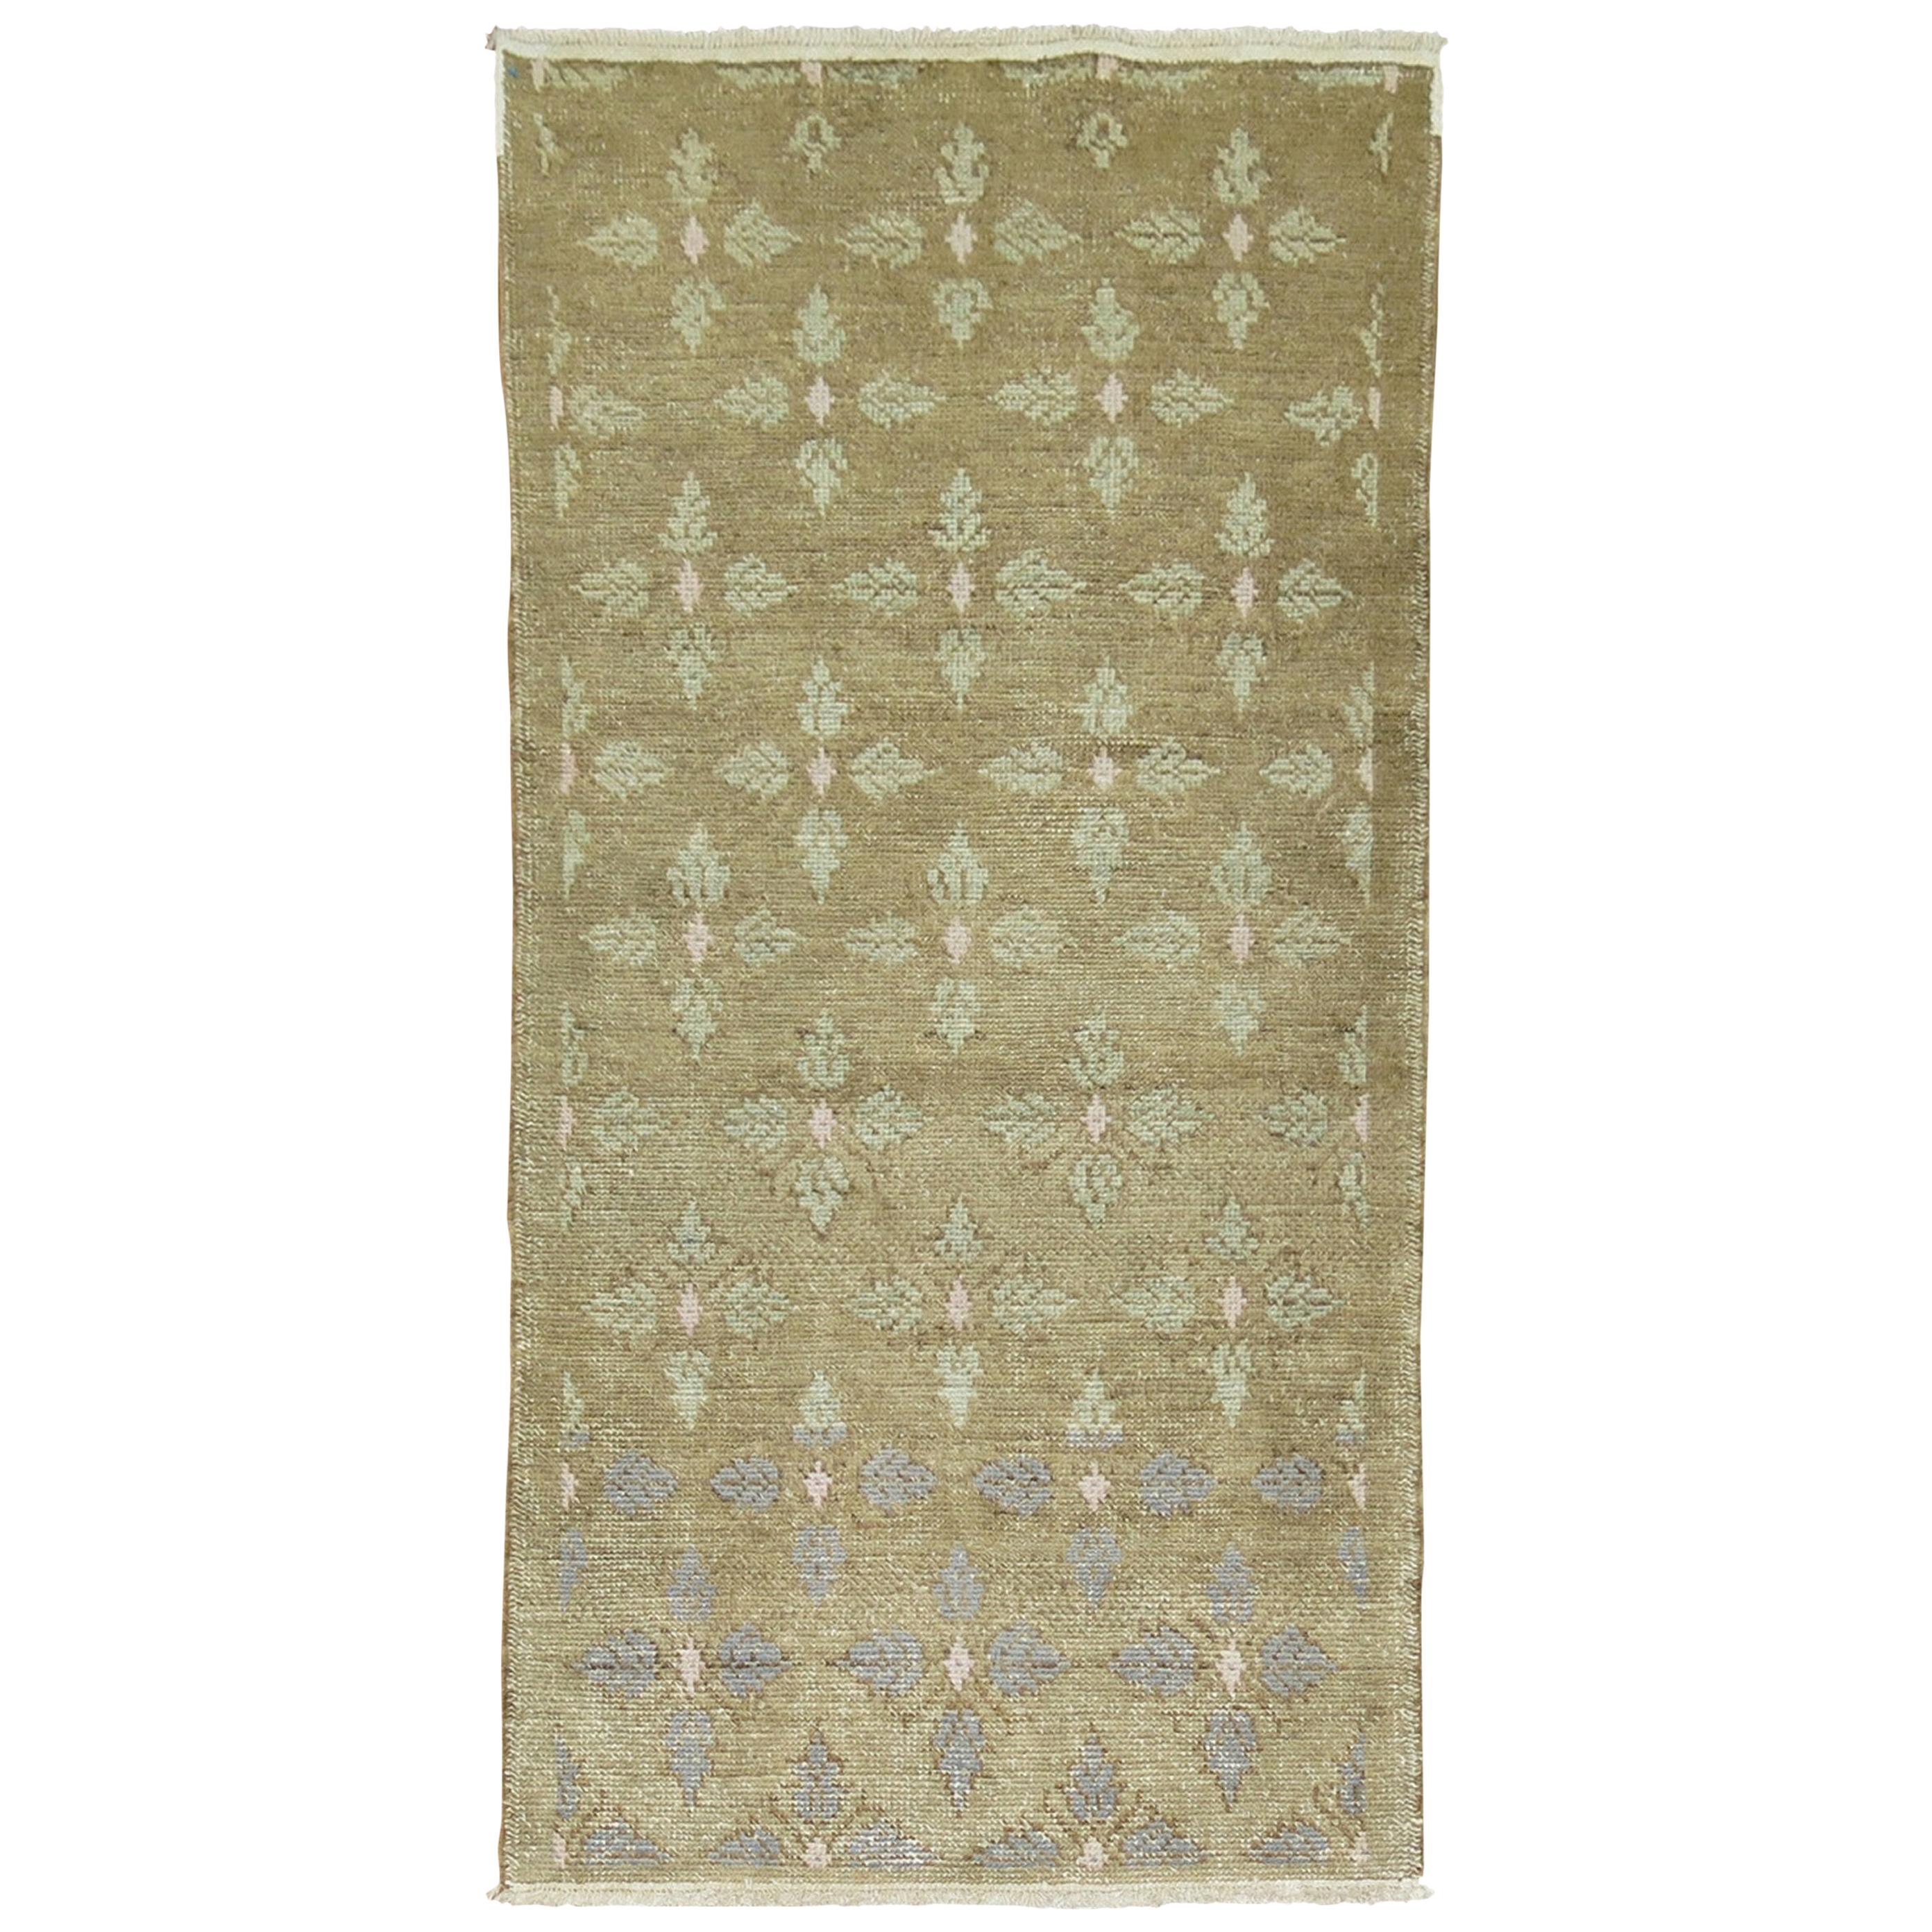 Neutral Color Turkish Scatter Rug, Mid-20th Century